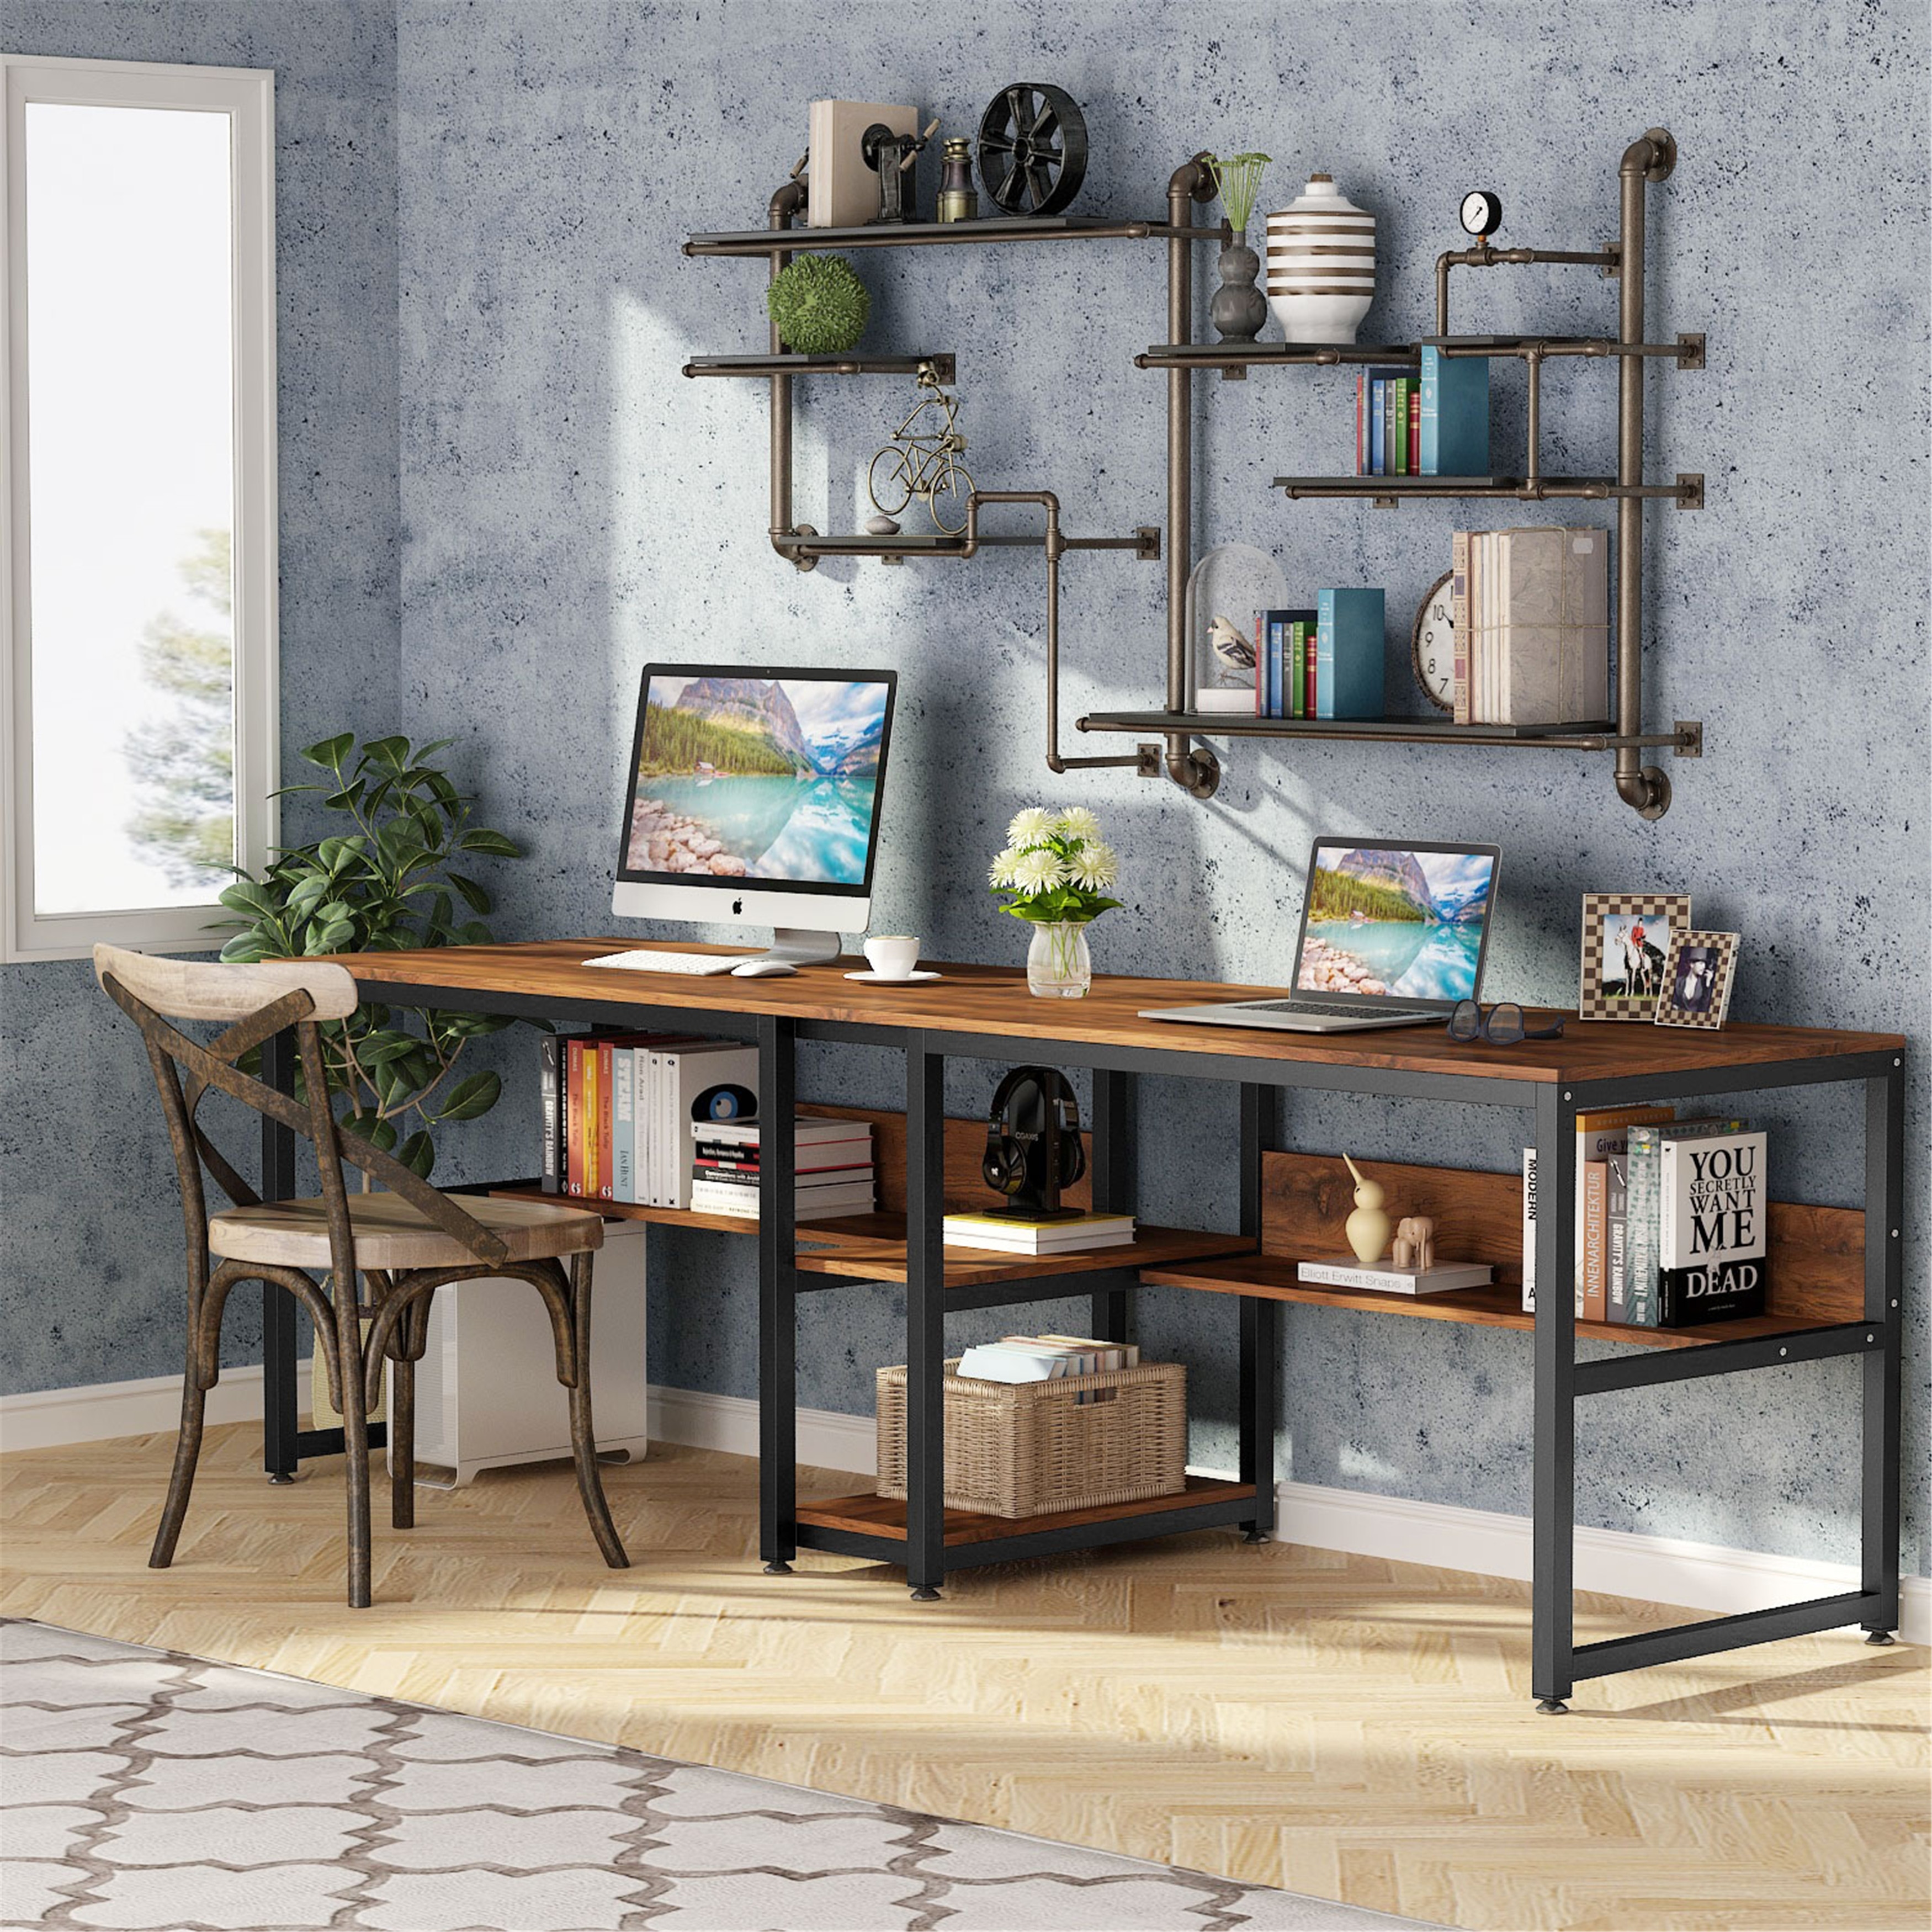 https://ak1.ostkcdn.com/images/products/is/images/direct/2c1095dc4de3c9f3e60dc15c88cc0a25c7670ef7/Two-Person-Desk-with-Bookshelf-78.7-Inches.jpg